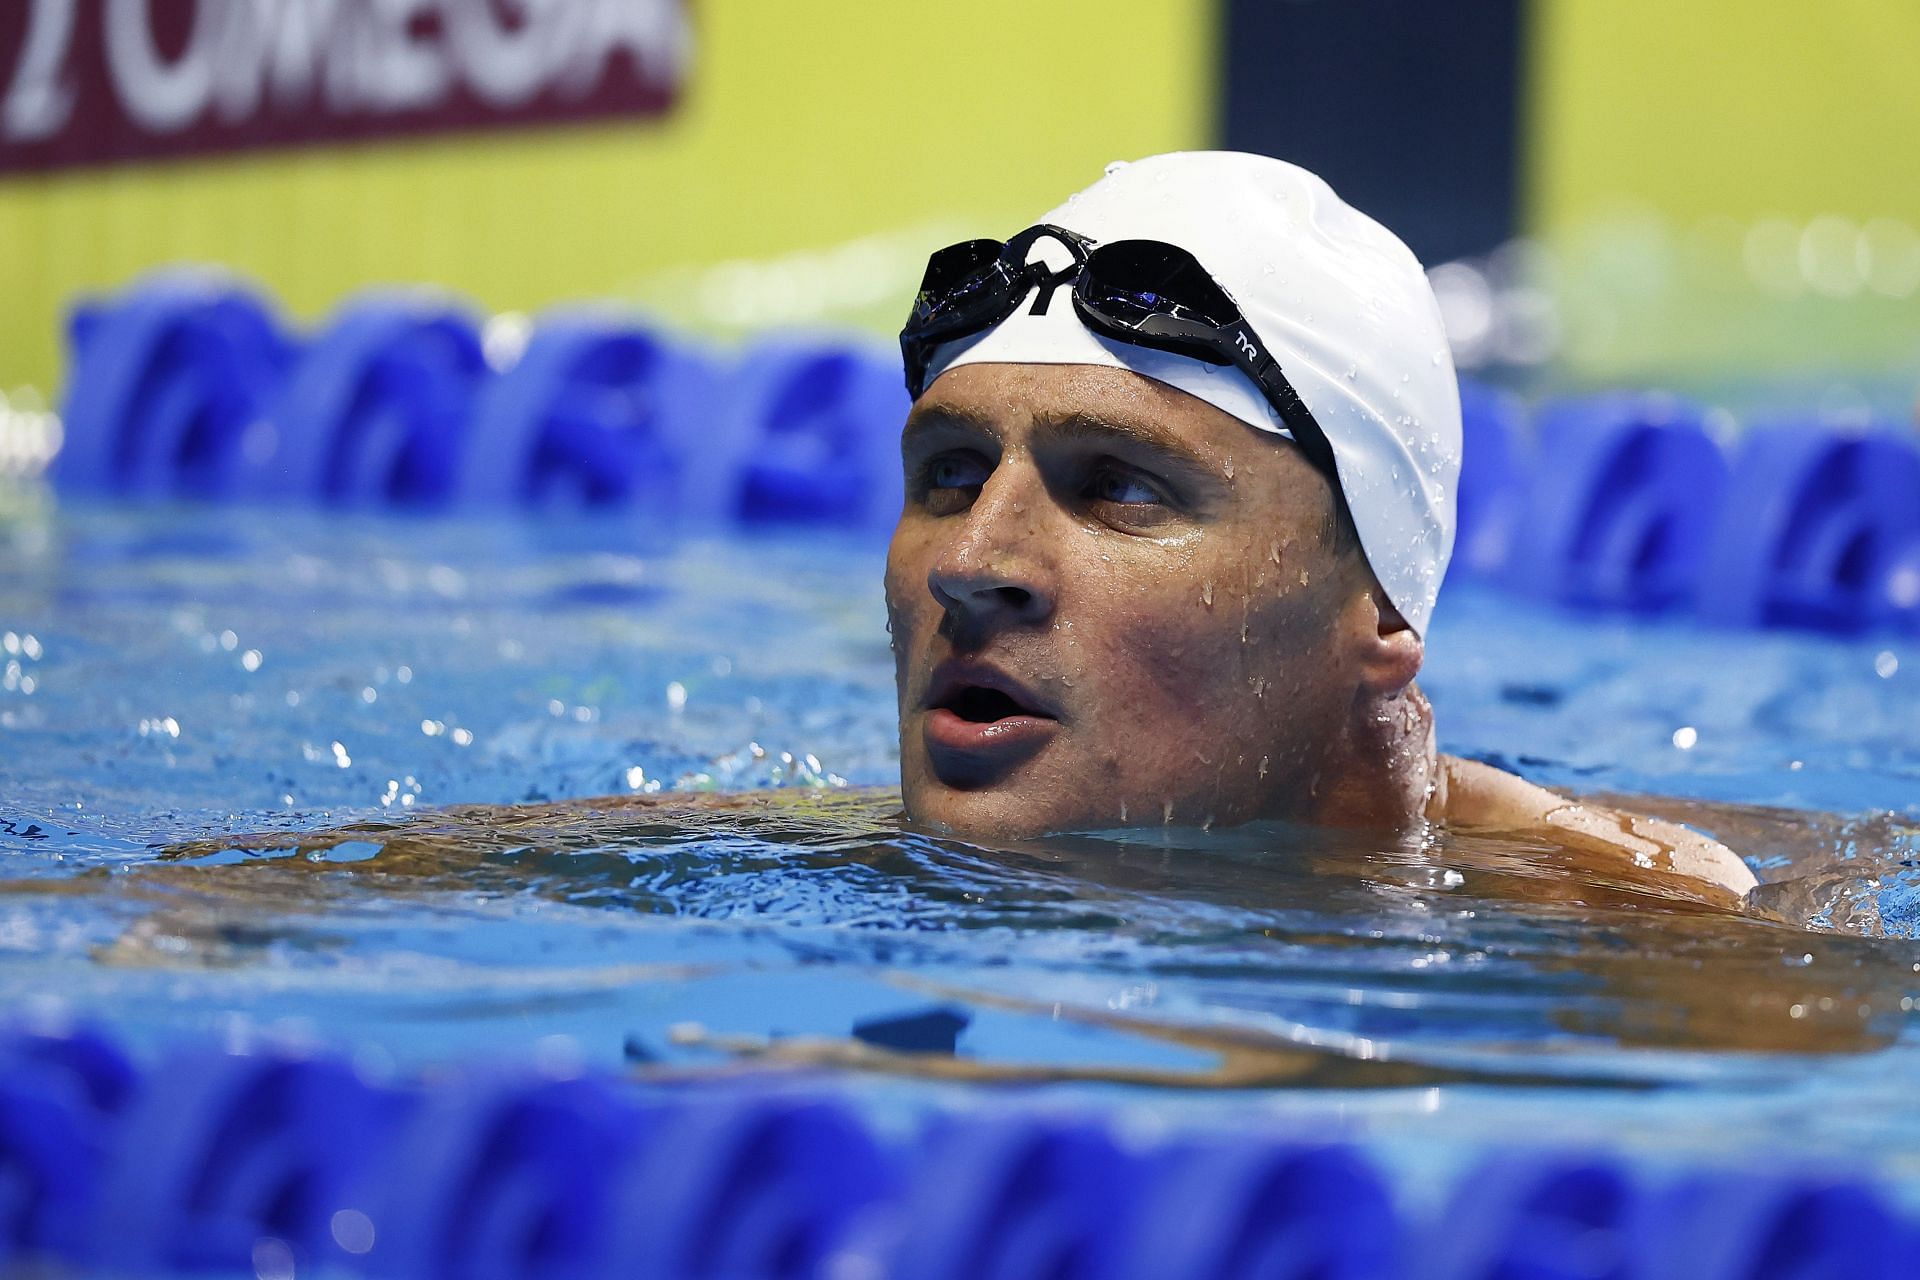 Ryan Lochte reacts after competing in a preliminary heat for the Men&rsquo;s 200m freestyle during Day Two of the 2021 U.S. Olympic Team Swimming Trials. (Photo by Tom Pennington/Getty Images)